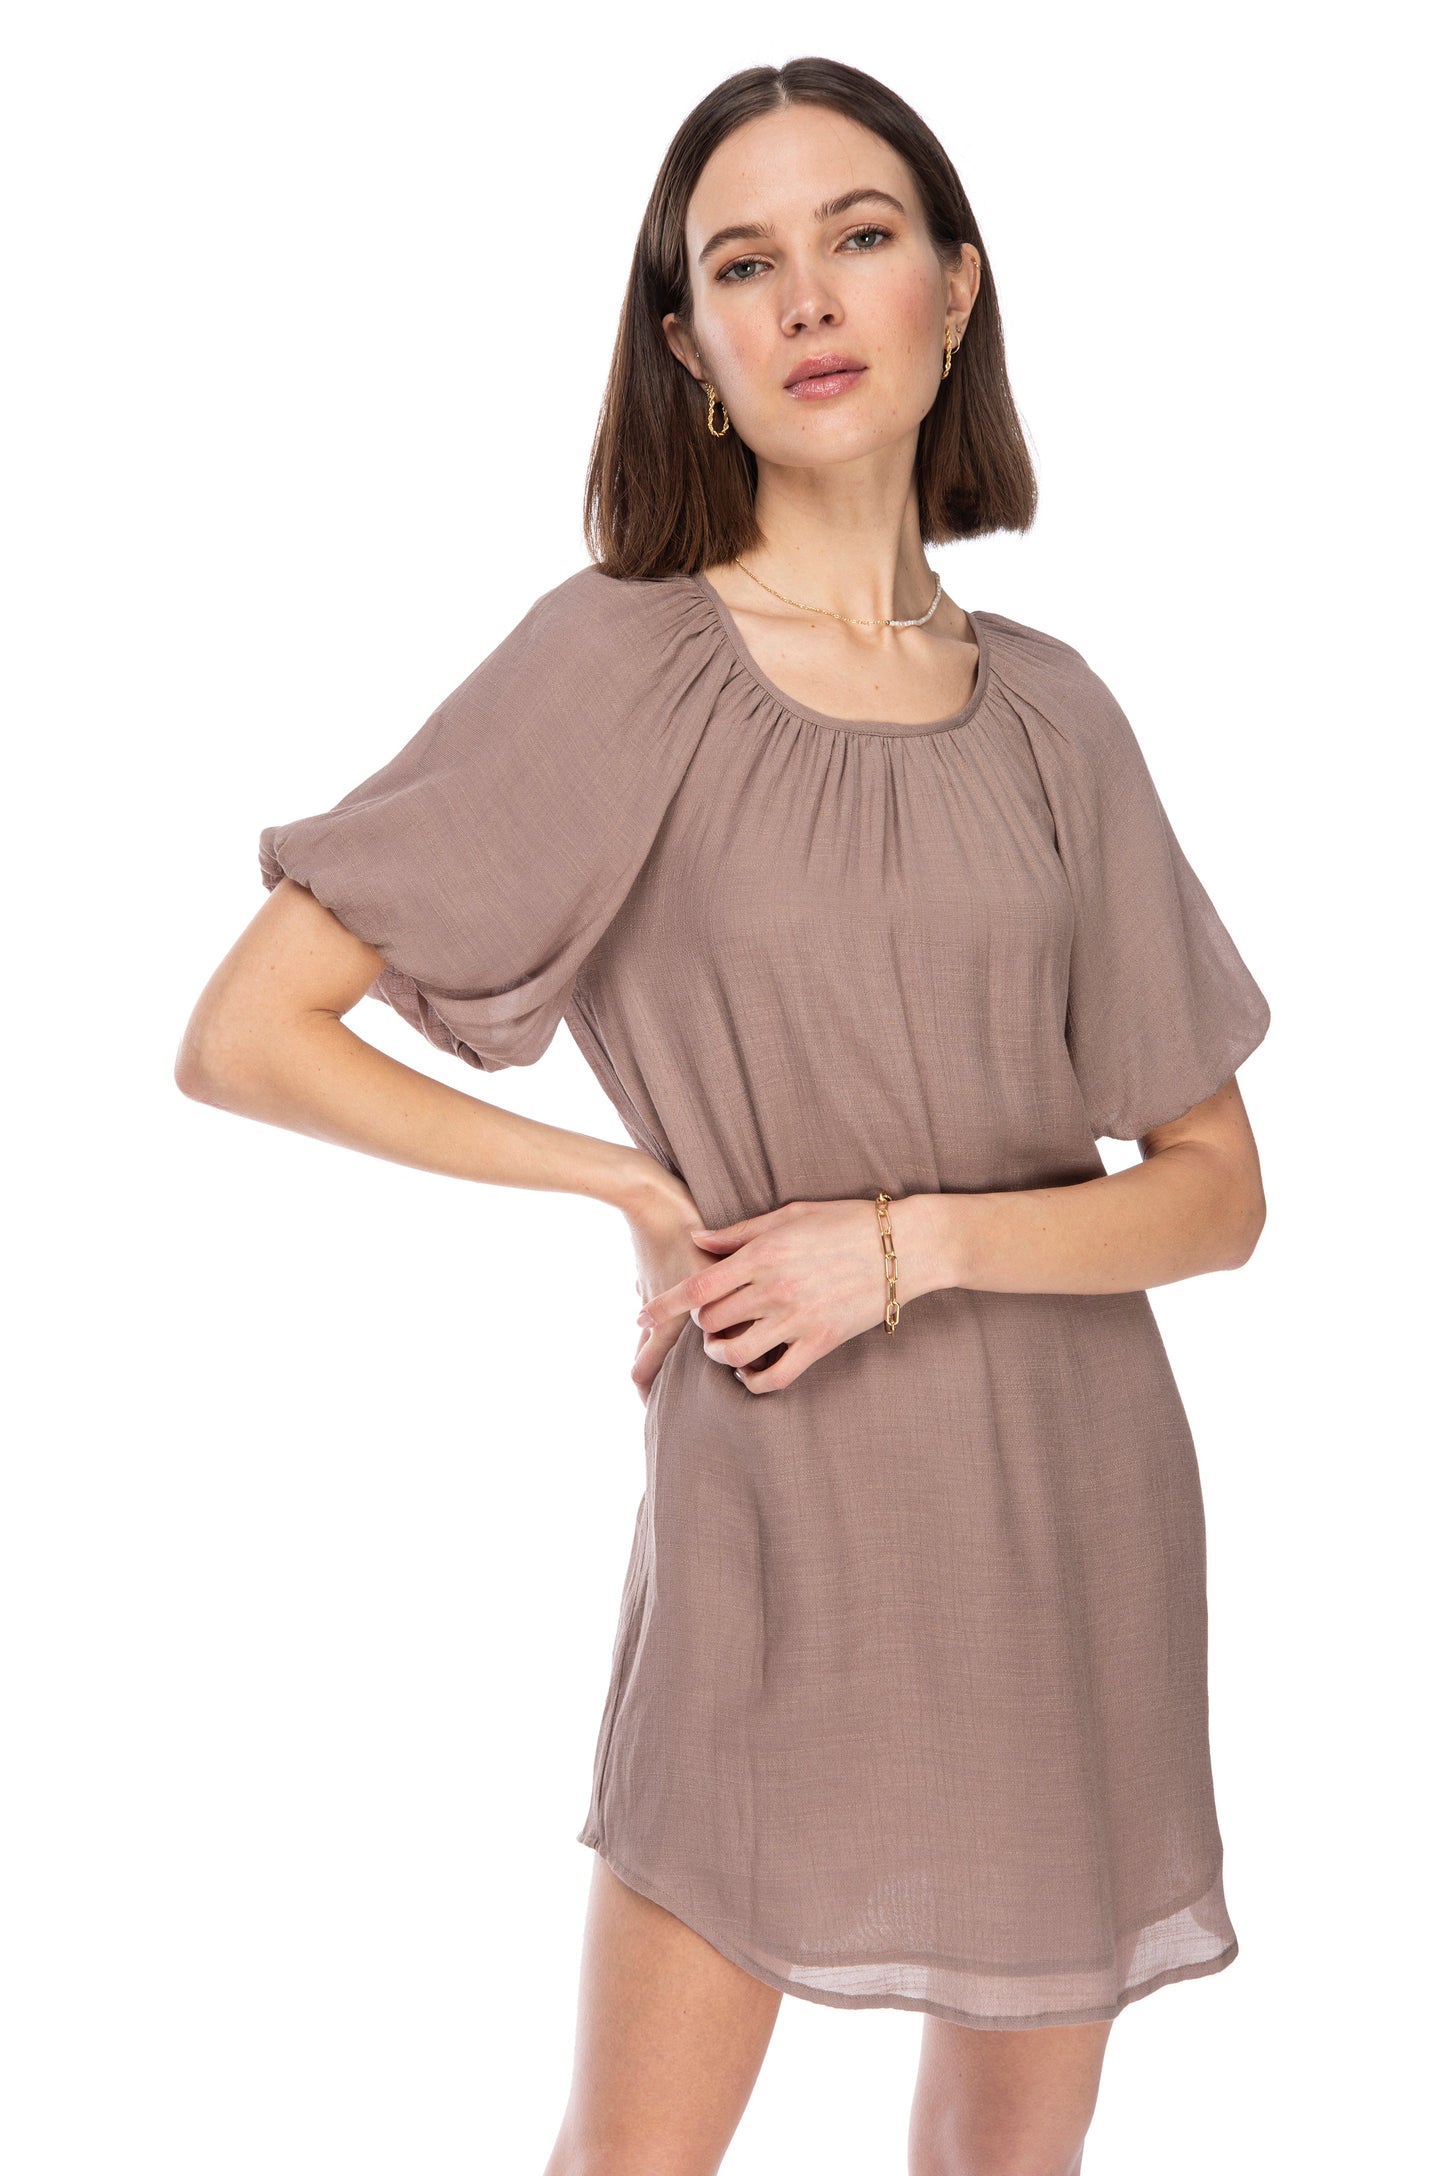 Woman in a chic taupe BUBBLE SLEEVE DRESS from B Collection by Bobeau posing with hand on hip.